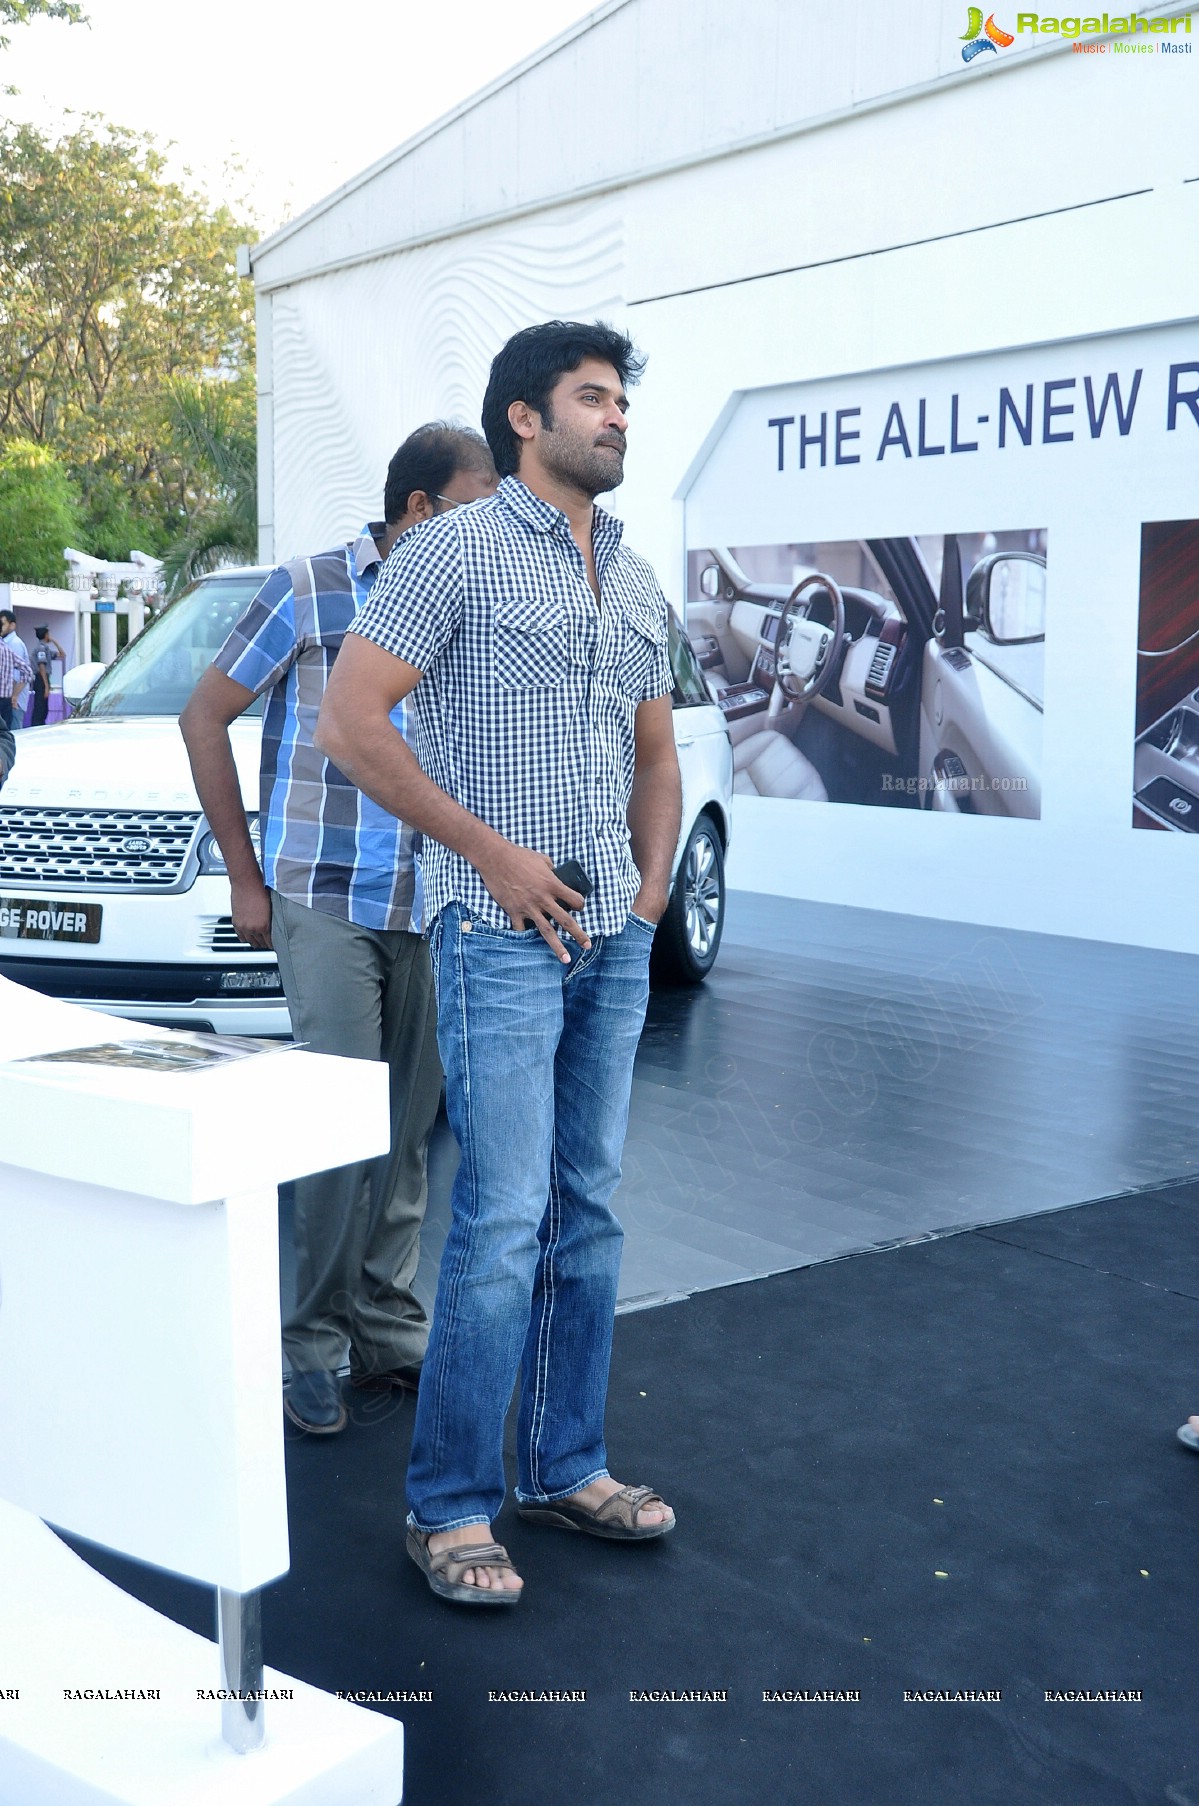 The Indian Luxury Expo 2012 at N Convention, Hyderabad (Set 2)